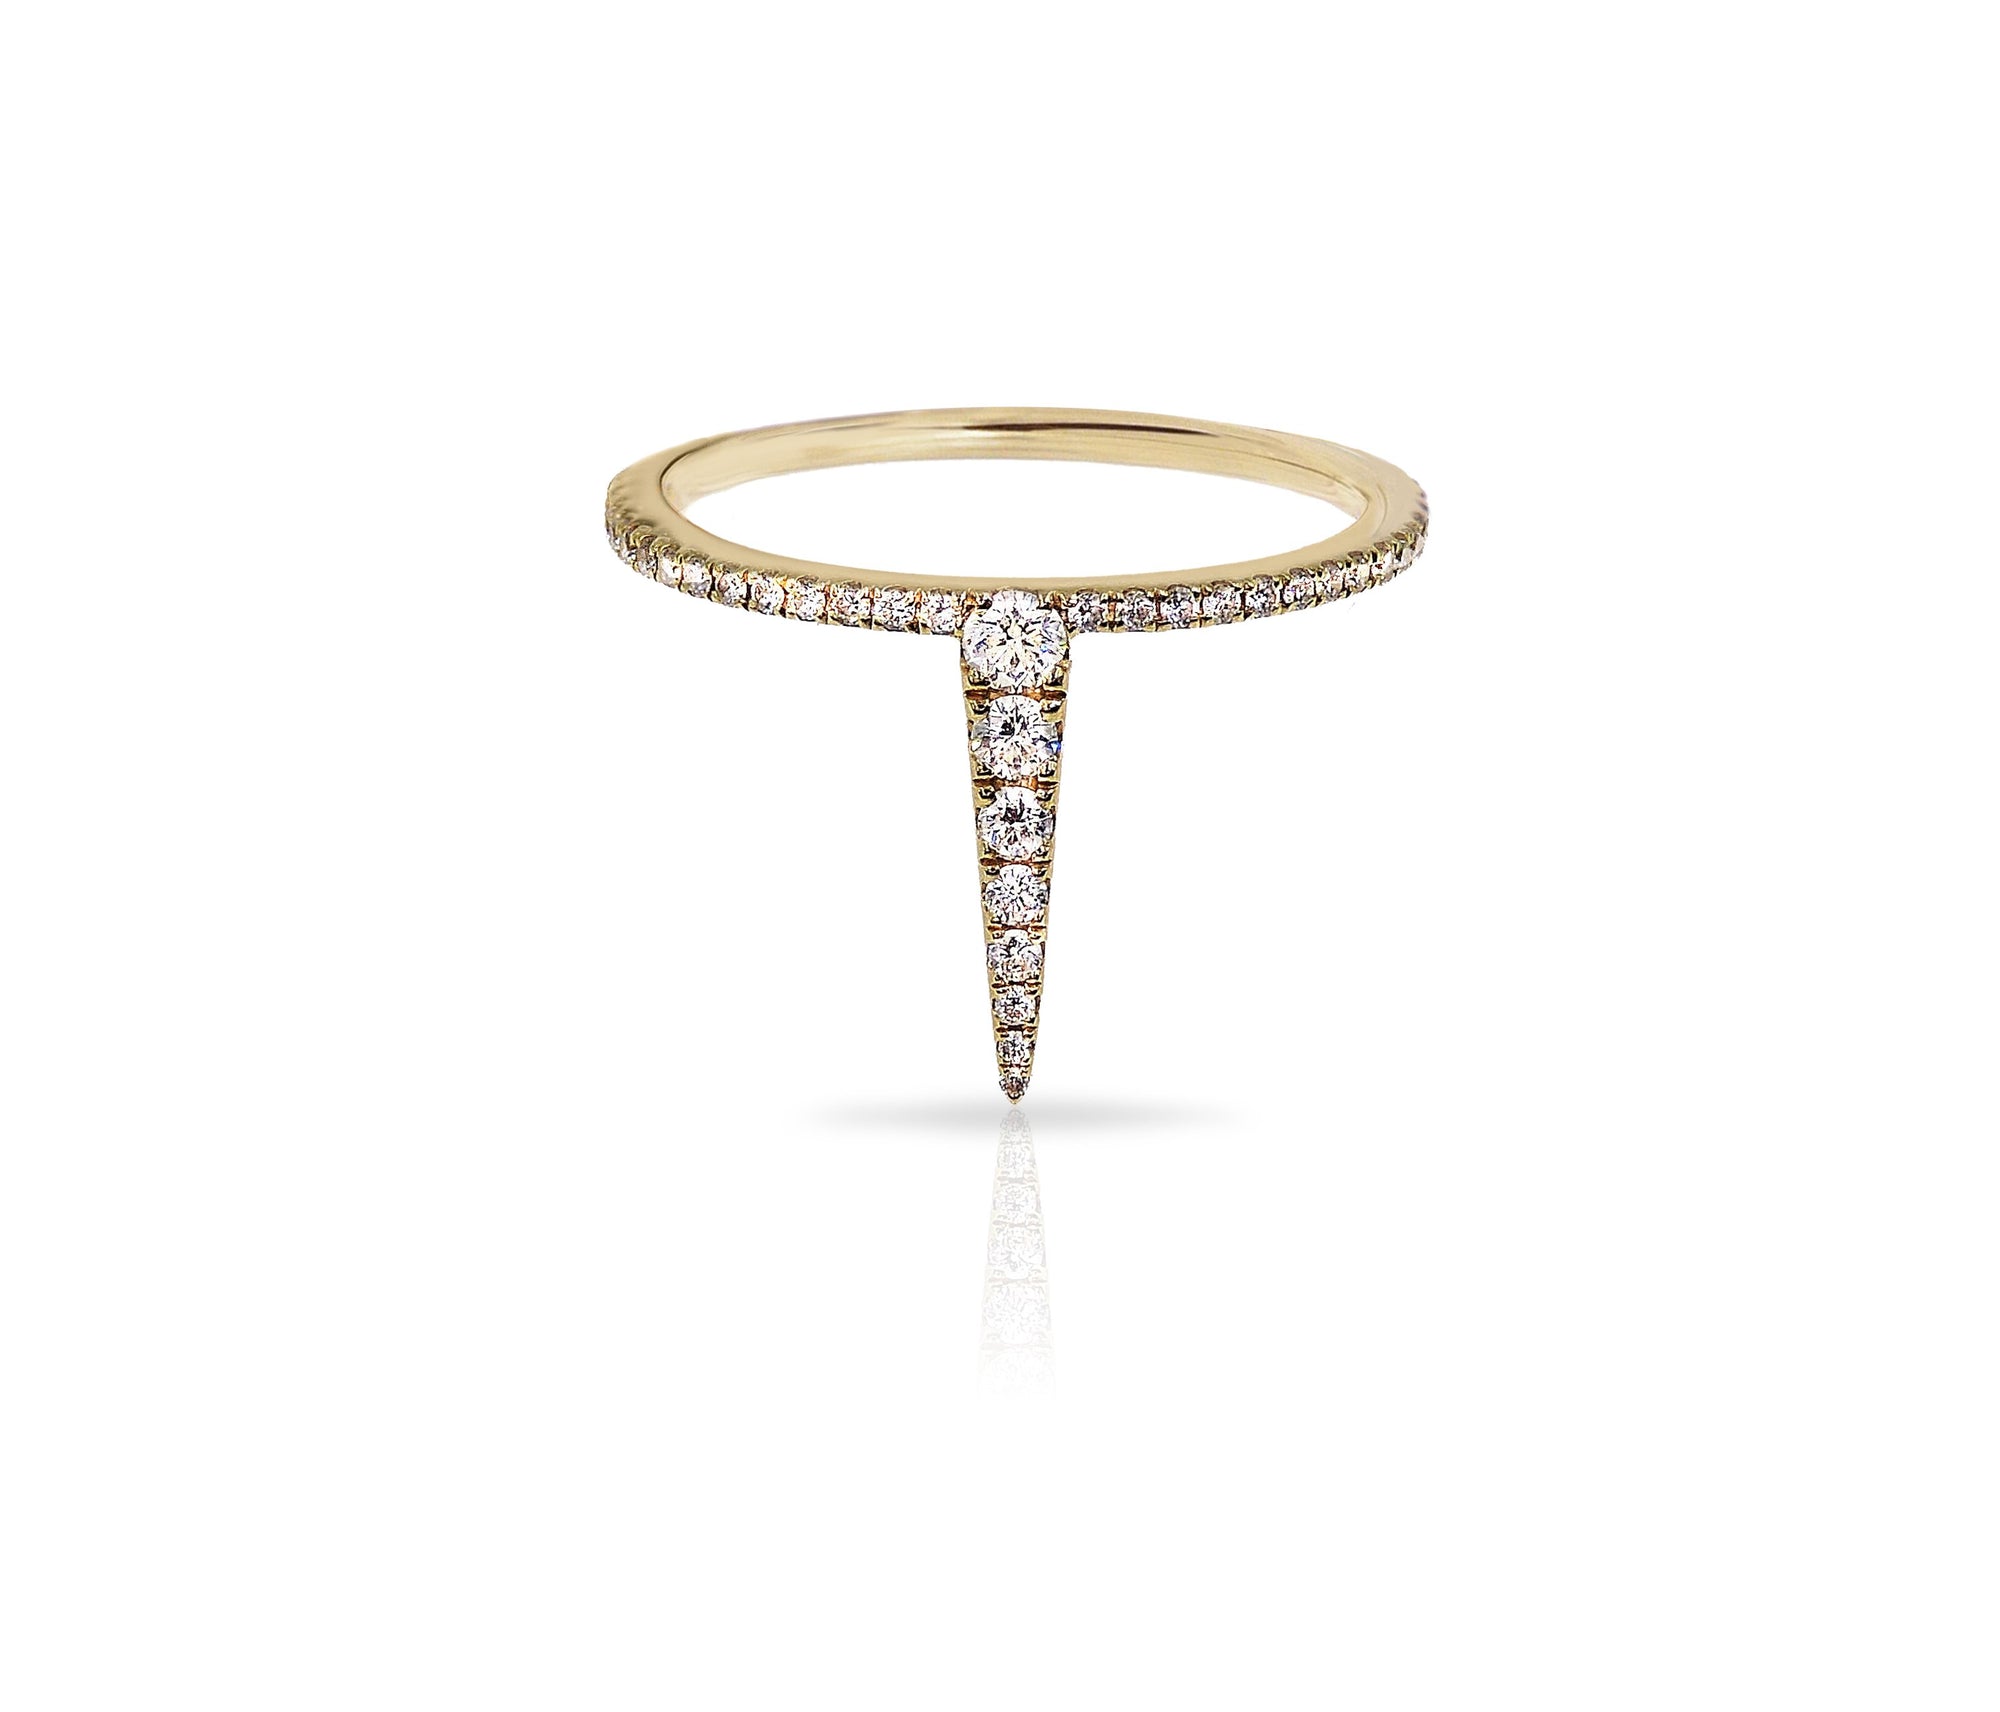 Move Link Diamond Ring in Yellow Gold | Messika 12728-YG